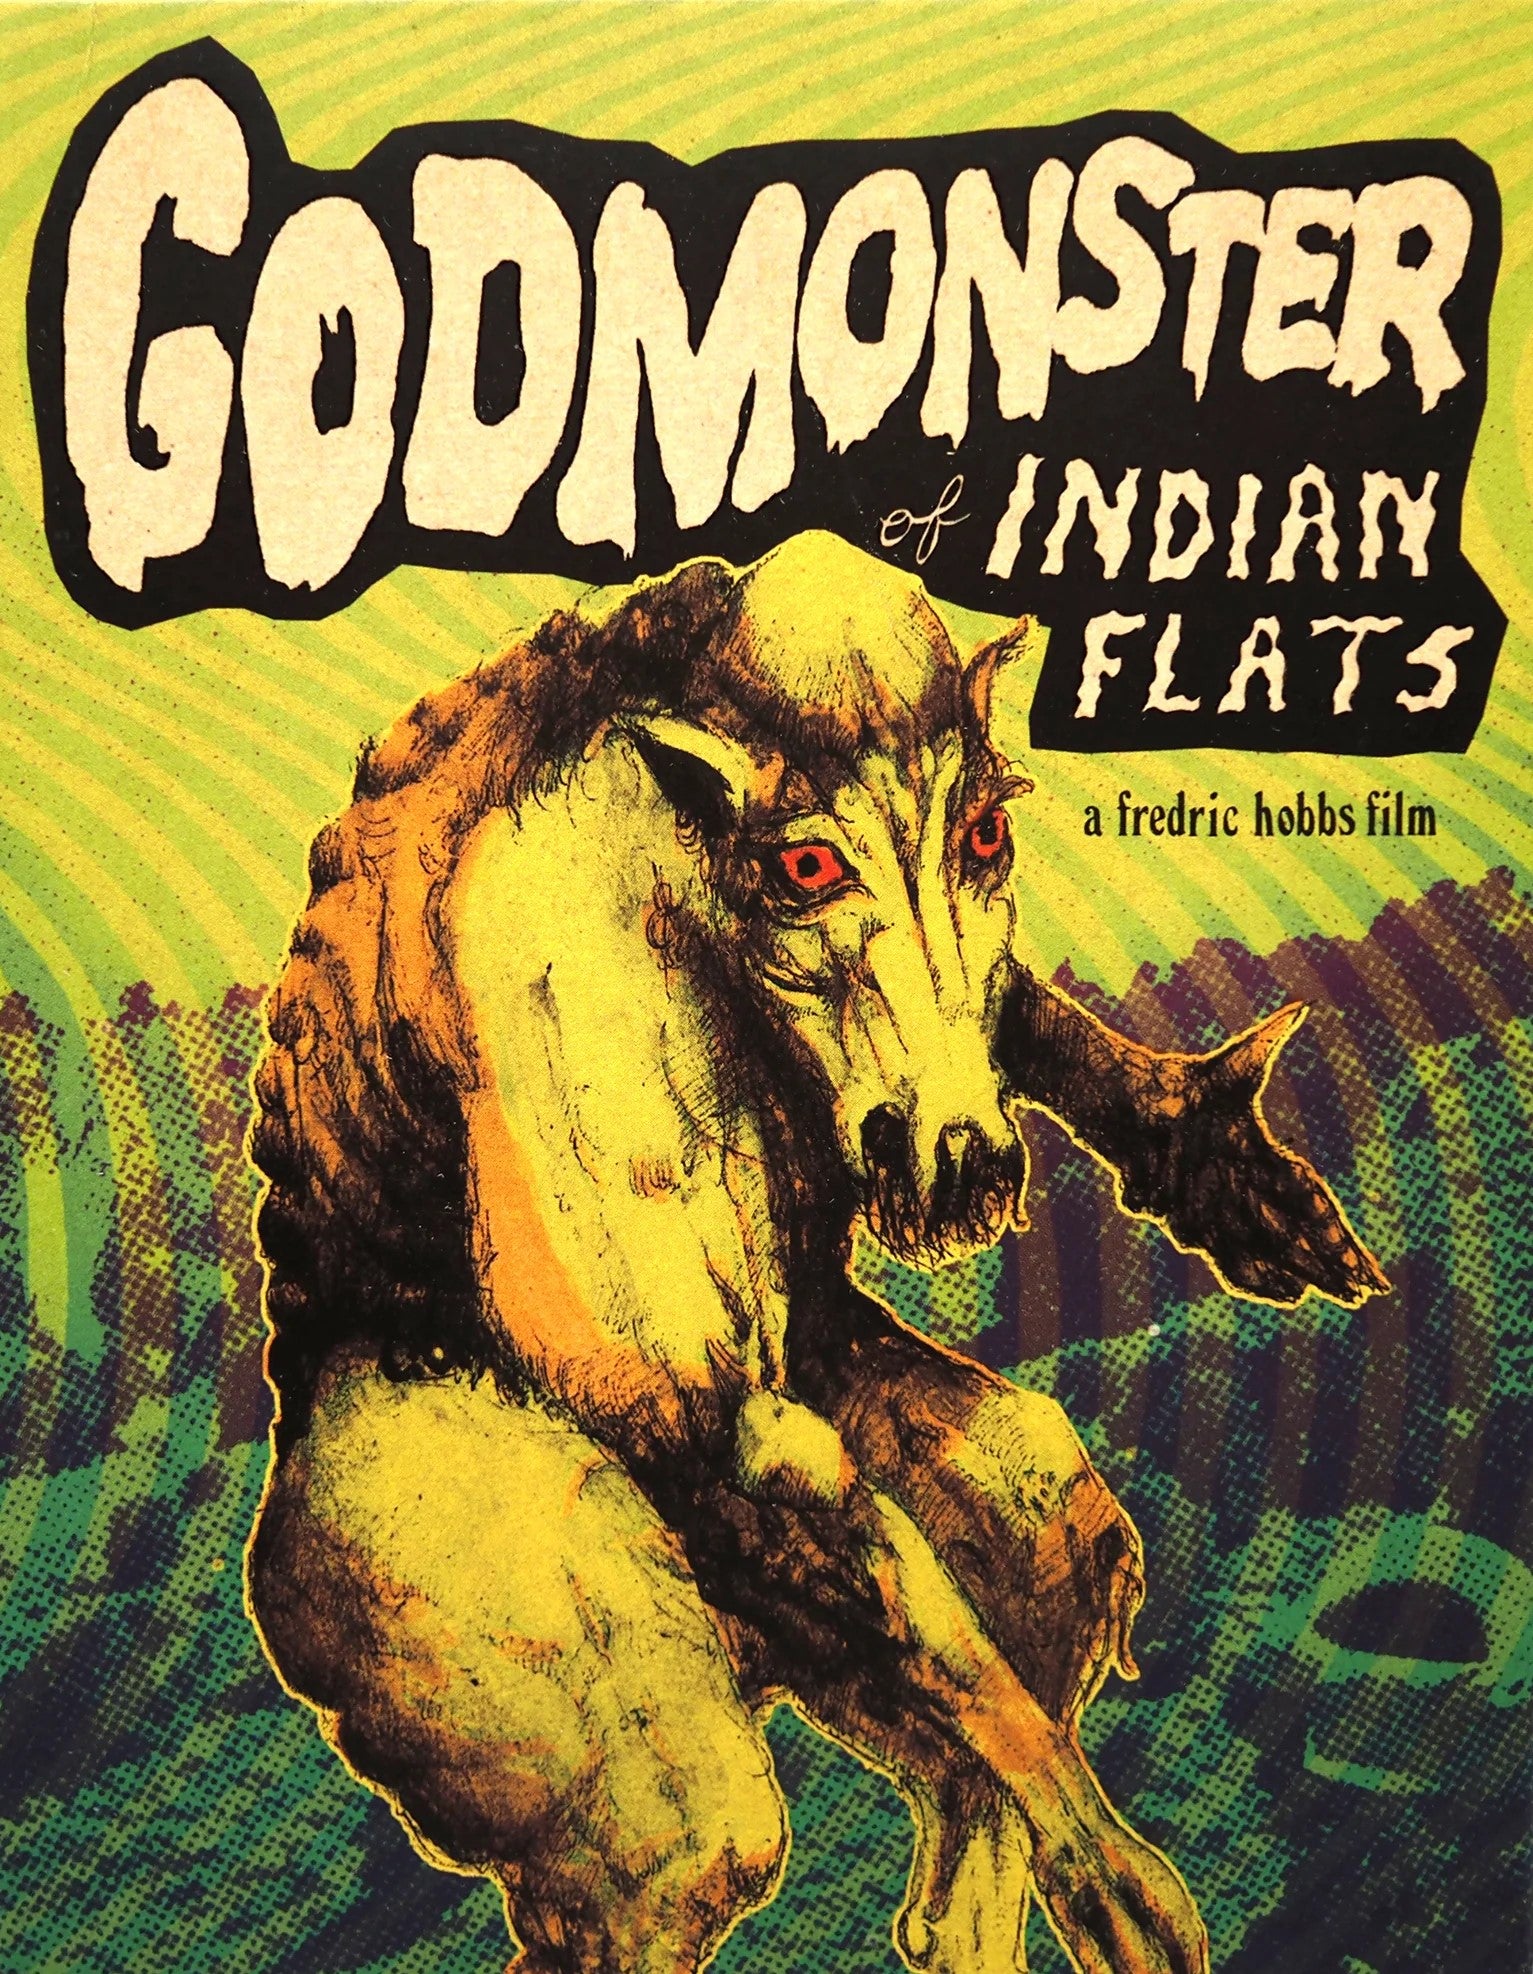 GODMONSTER OF INDIAN FLATS (LIMITED EDITION) BLU-RAY